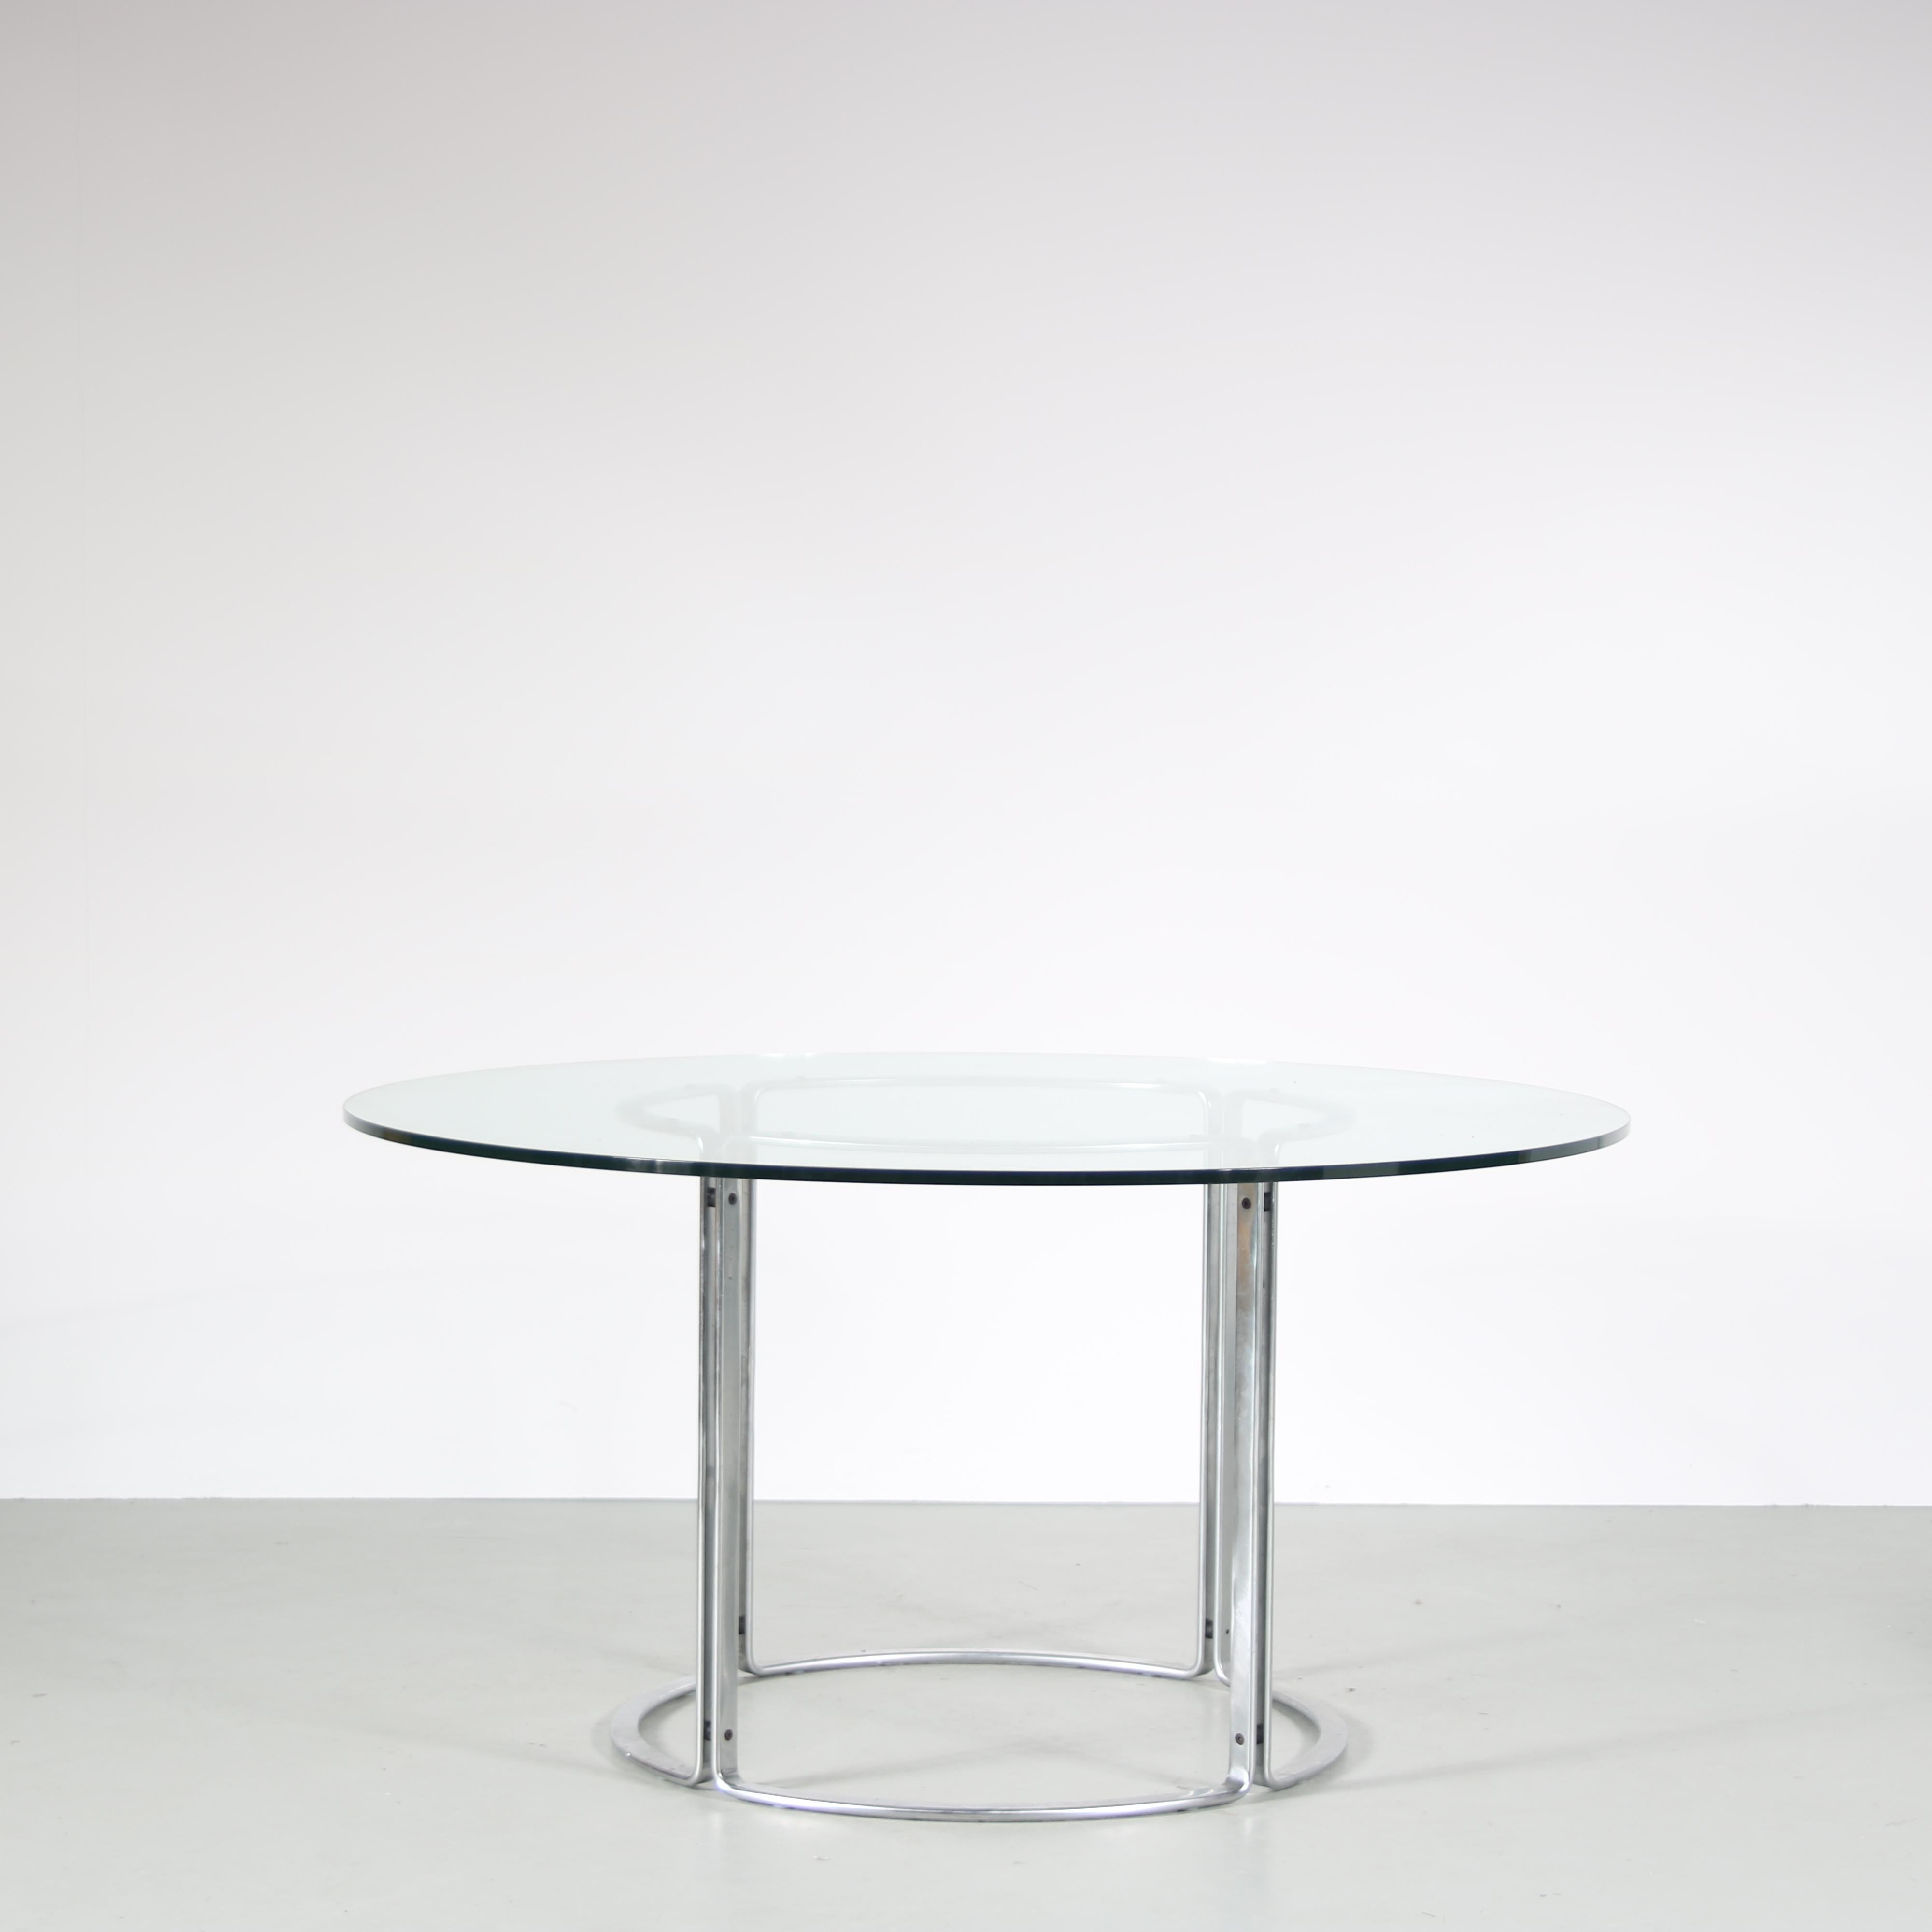 A beautiful and large dining table designed by Horst Brüning, manufactured by Kill International in Germany around 1960.

This high quality piece features a chrome plated metal base with a round clear glass top. The metal base is really nicely